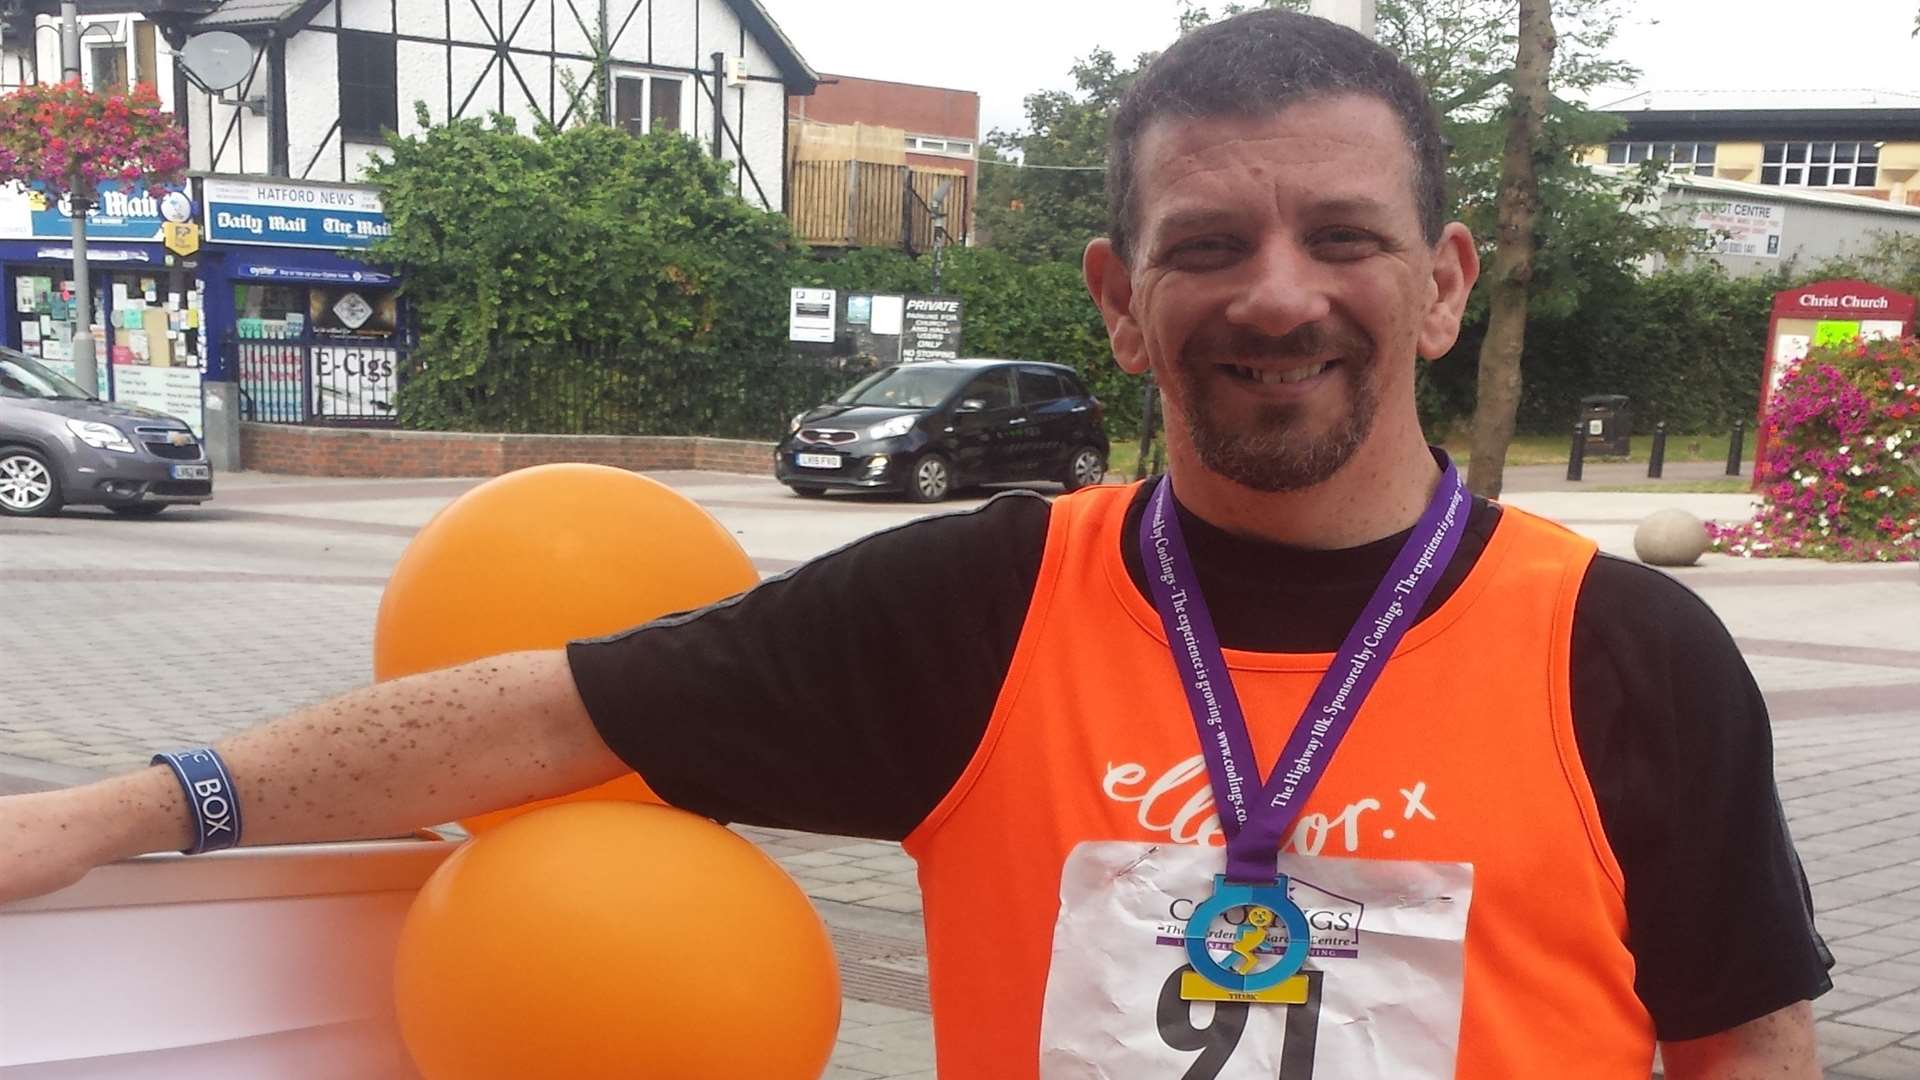 Robin Roberts is marking his 50th birthday by walking 50 miles for the charity ellenor